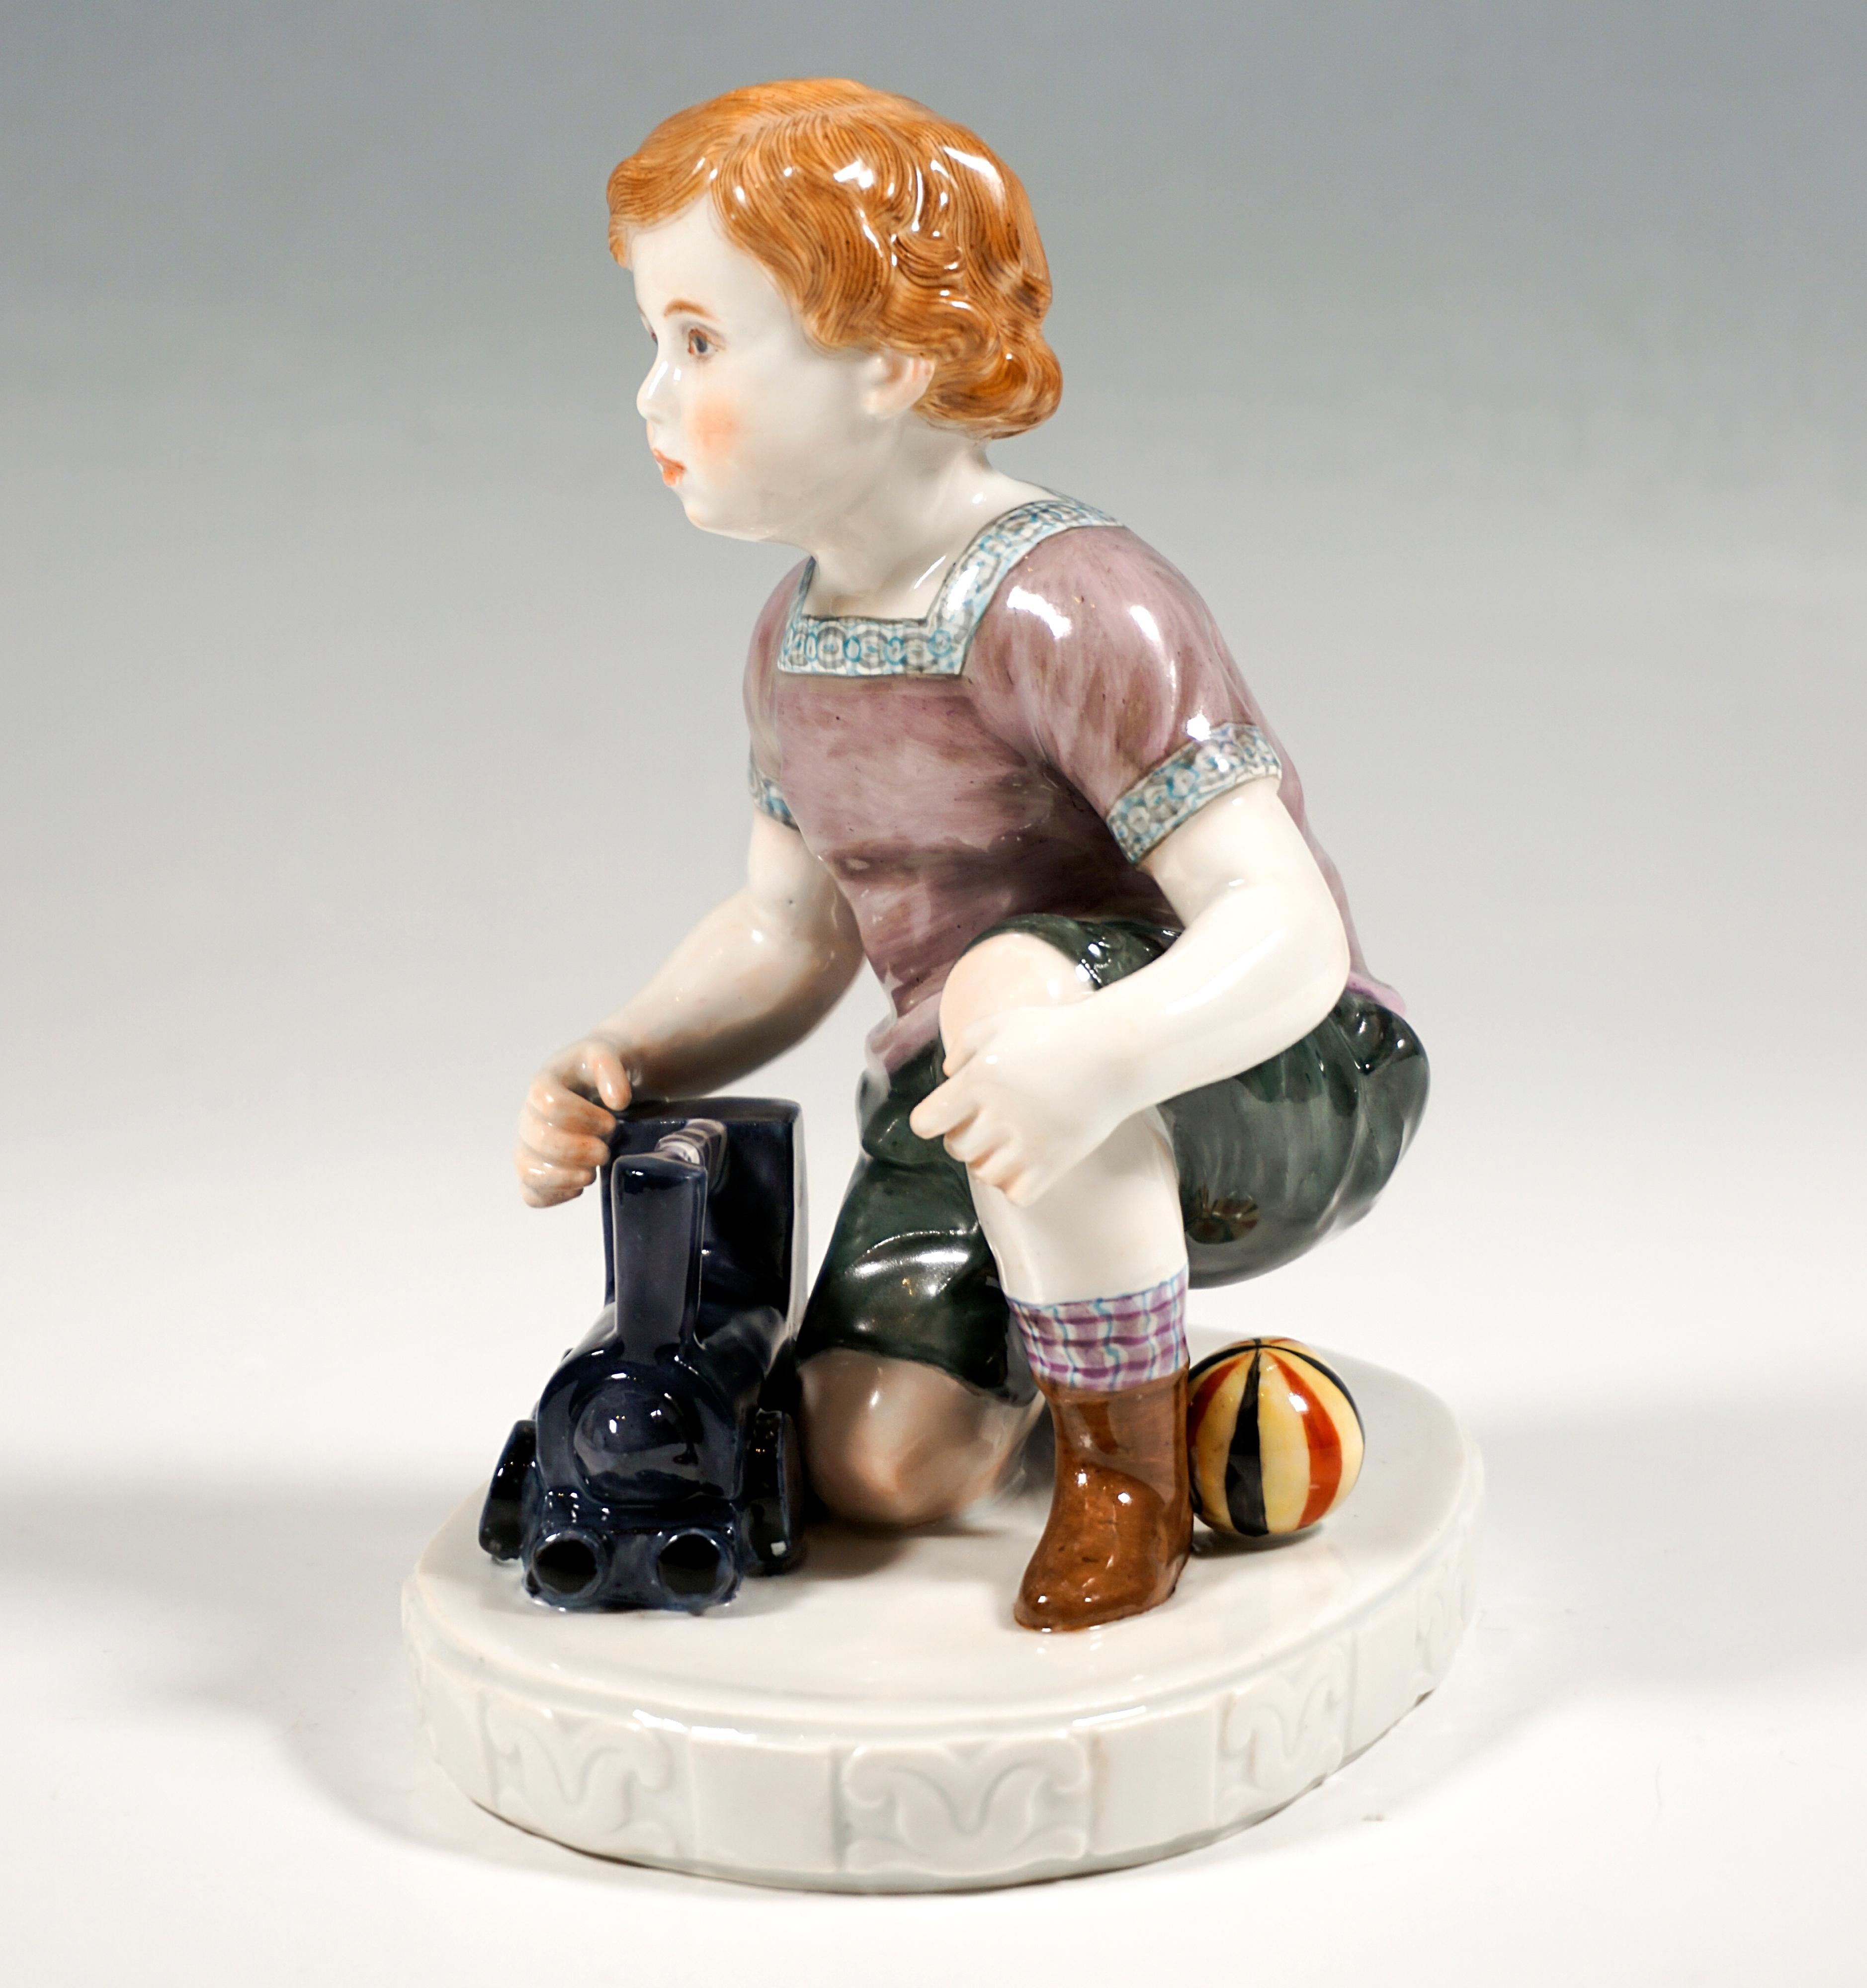 Hand-Crafted Art Nouveau Figure, Child With Locomotive & Ball, by E. Oehler, Meissen, Ca 1909